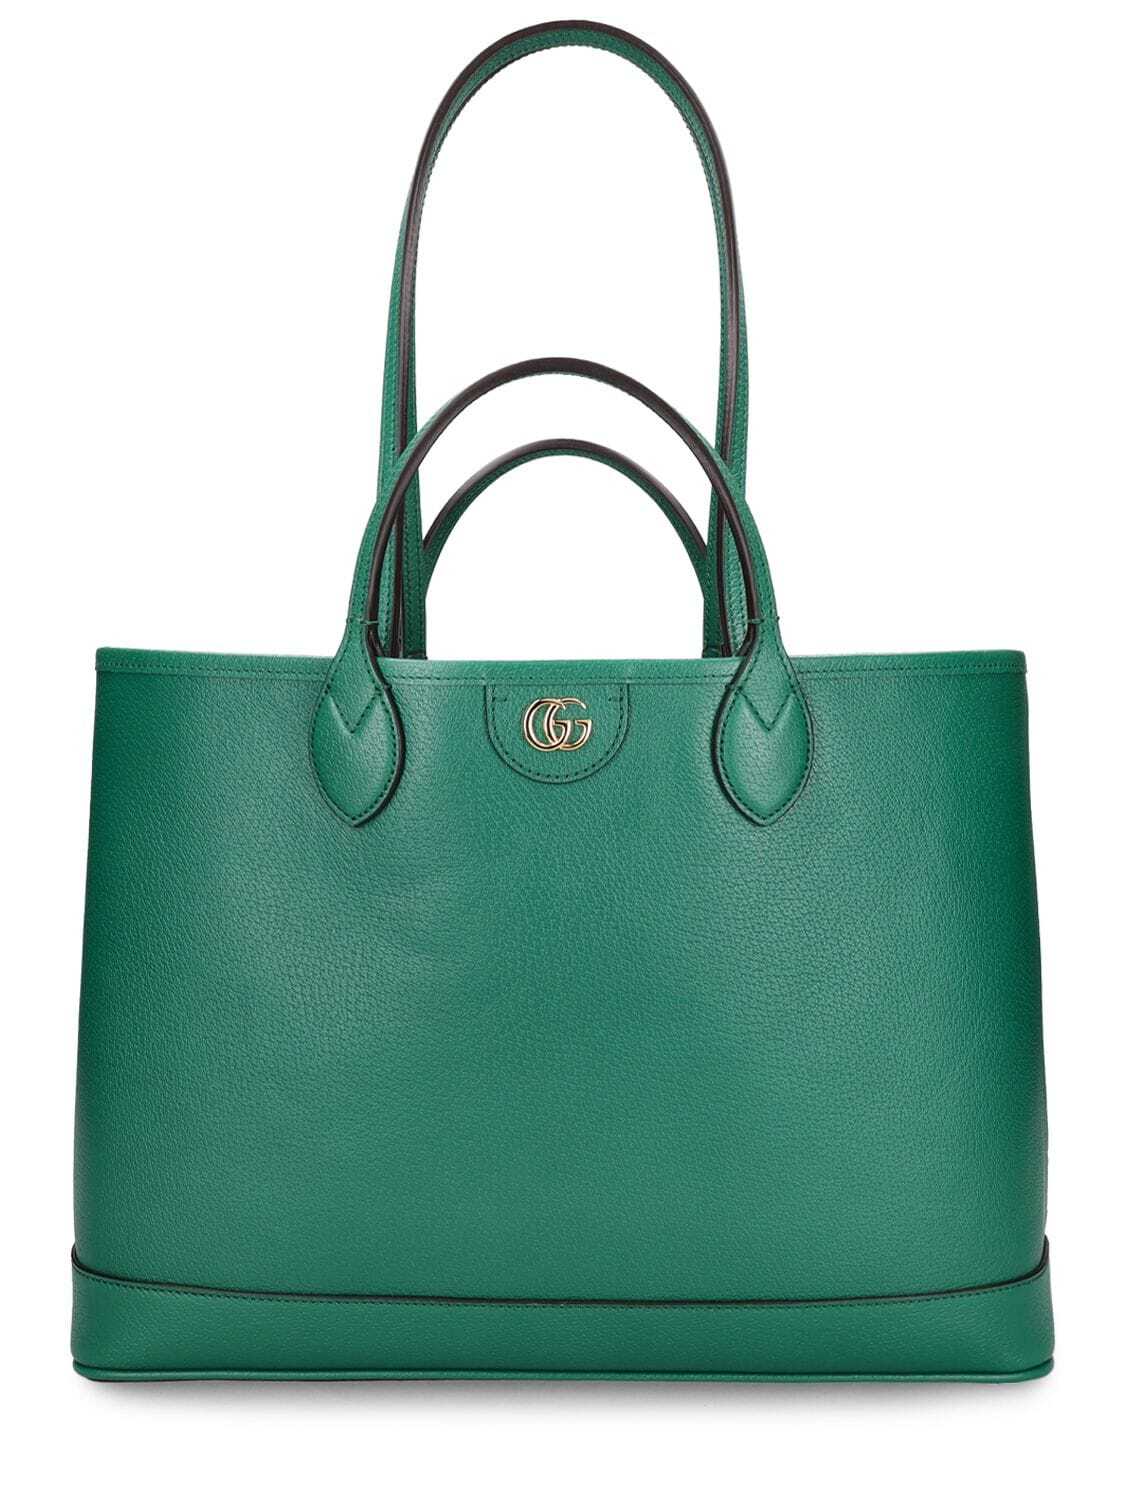 GUCCI Ophidia Leather Tote Bag in emerald